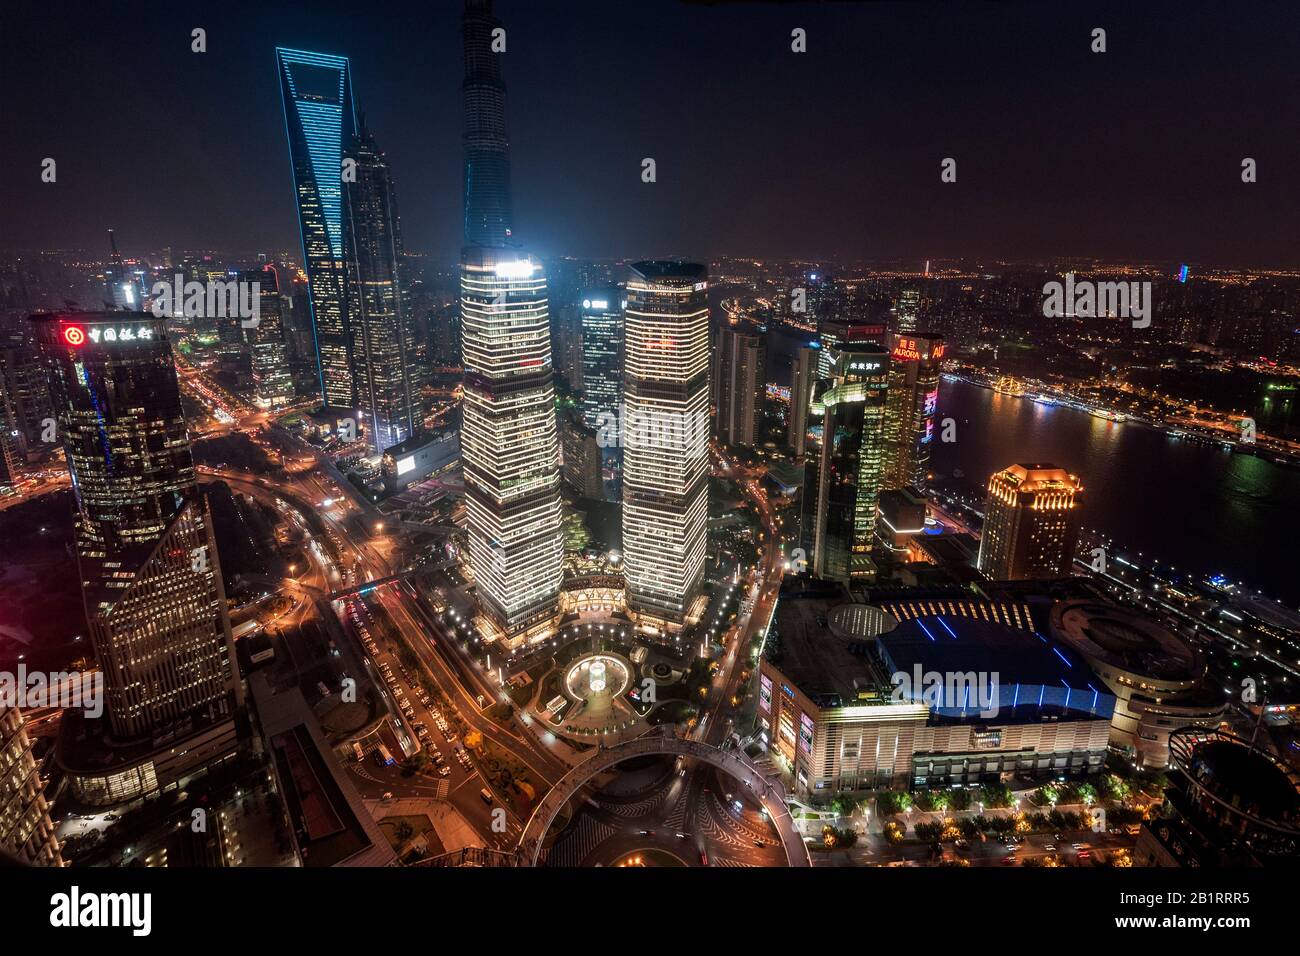 Cityscape, view of IFC, SWFC, Jin Mao Tower at night, Lujiazui, Pudong, Shanghai, China Stock Photo